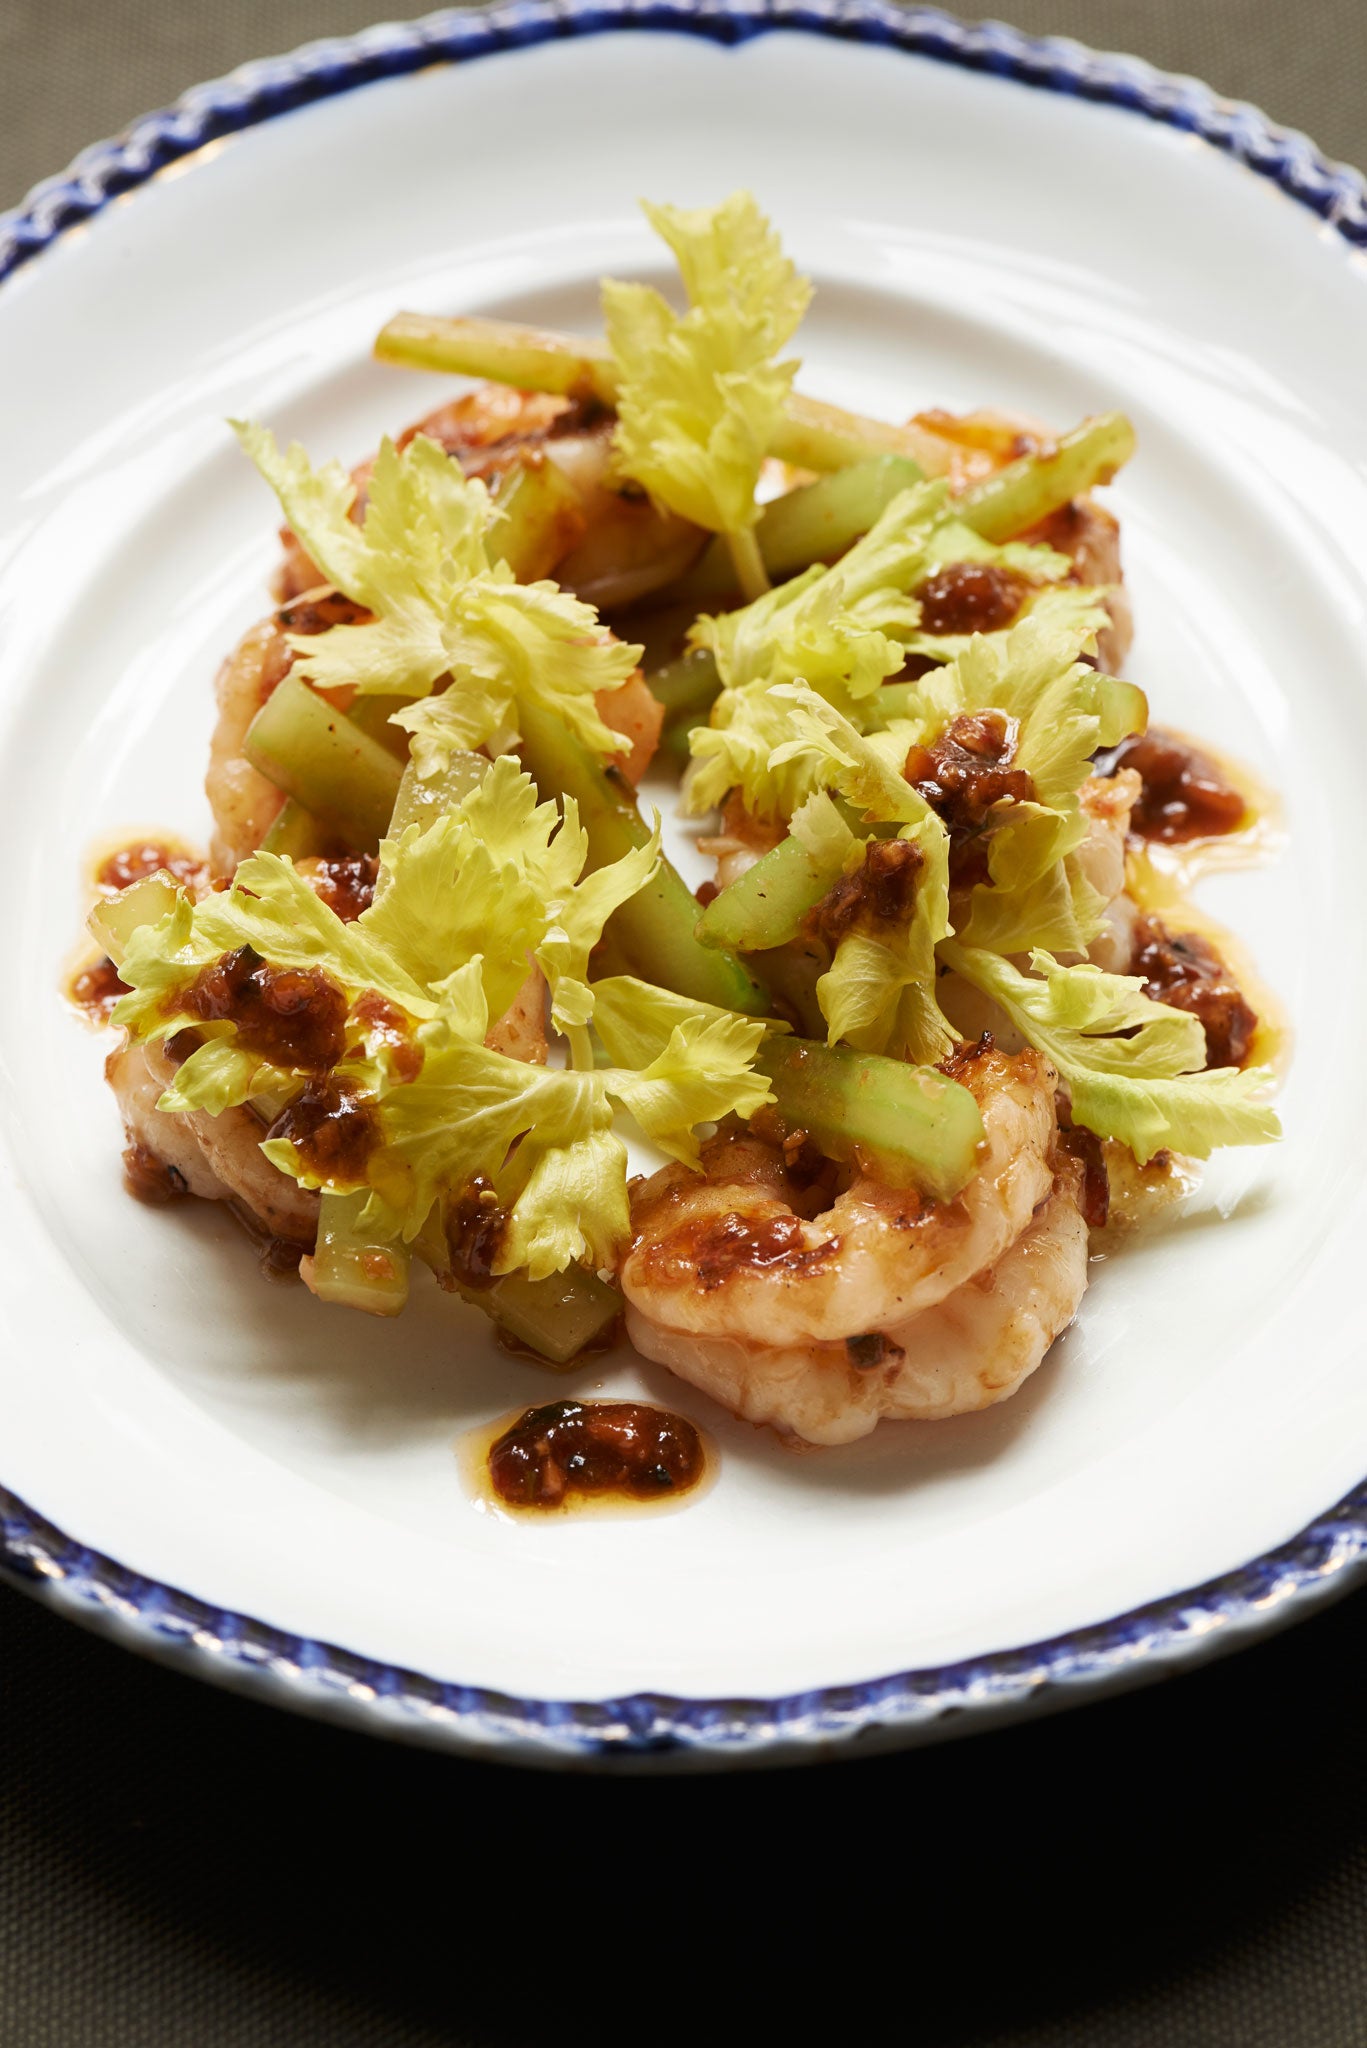 Griddled prawns with sweet and sour celery